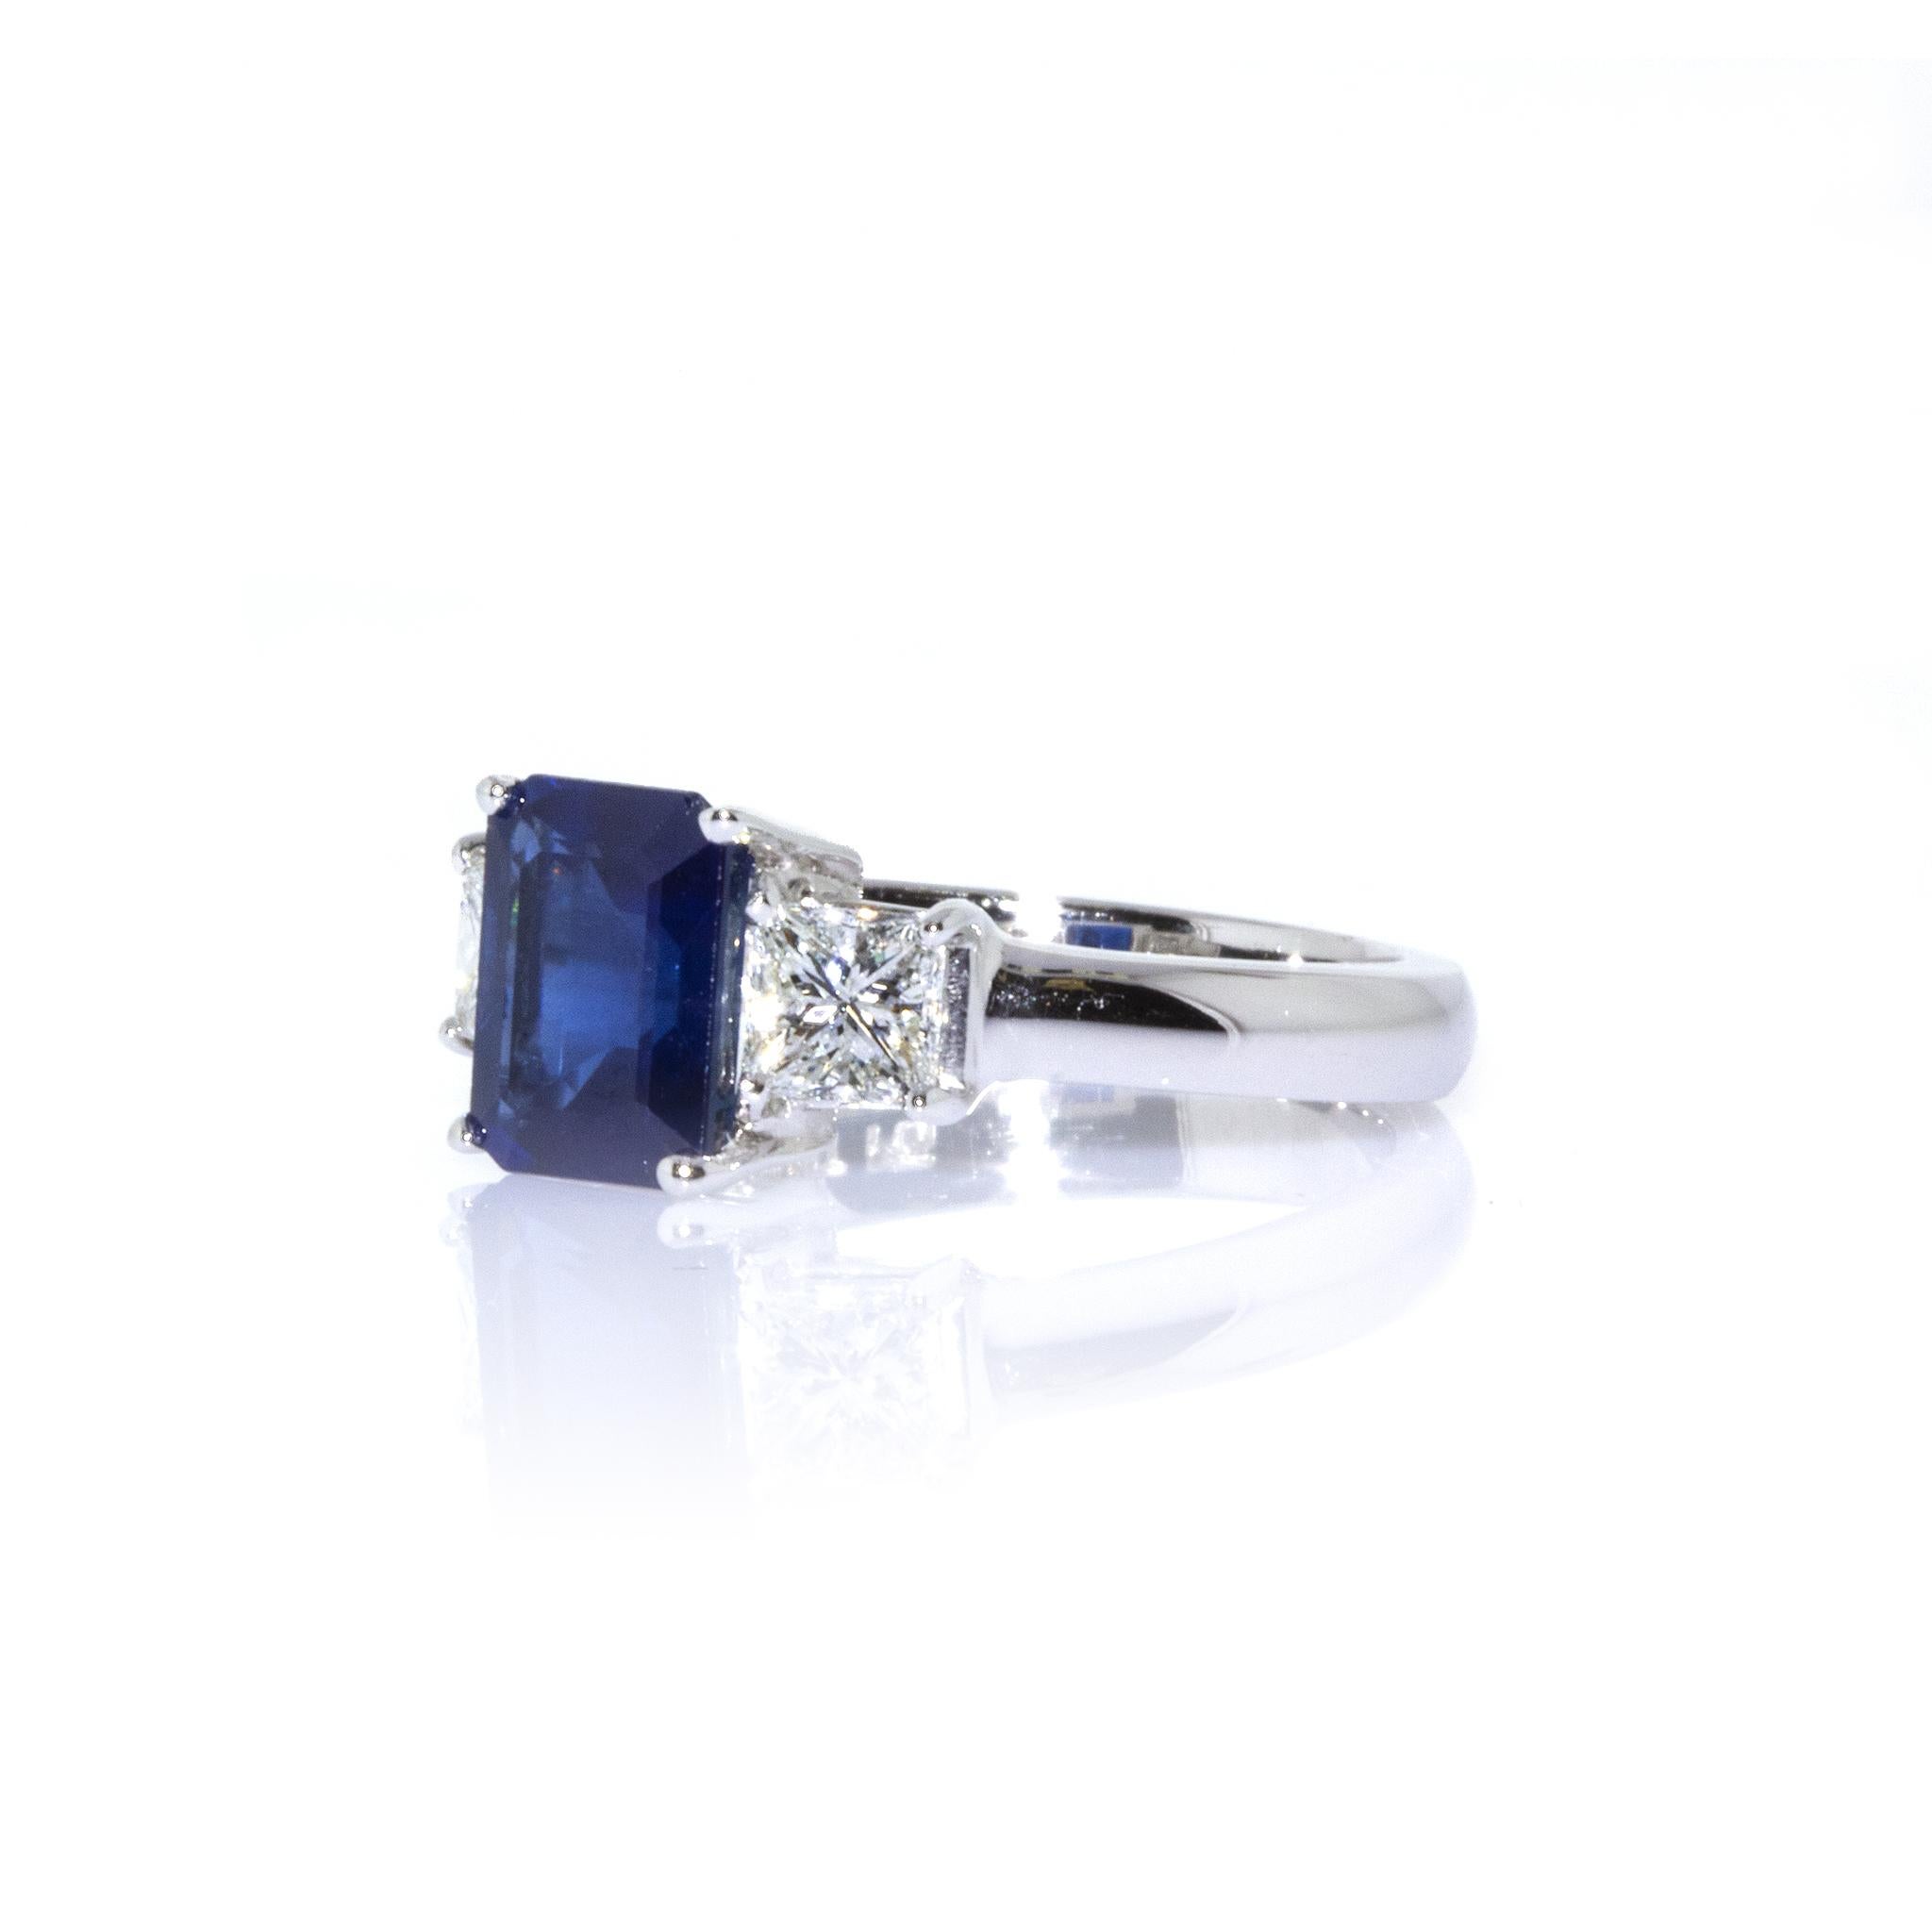 Platinum
Diamond: 0.74 ct twd 
Sapphire: 2.45ct twd
Total Weight: 5.9 grams
Ring Size: 6